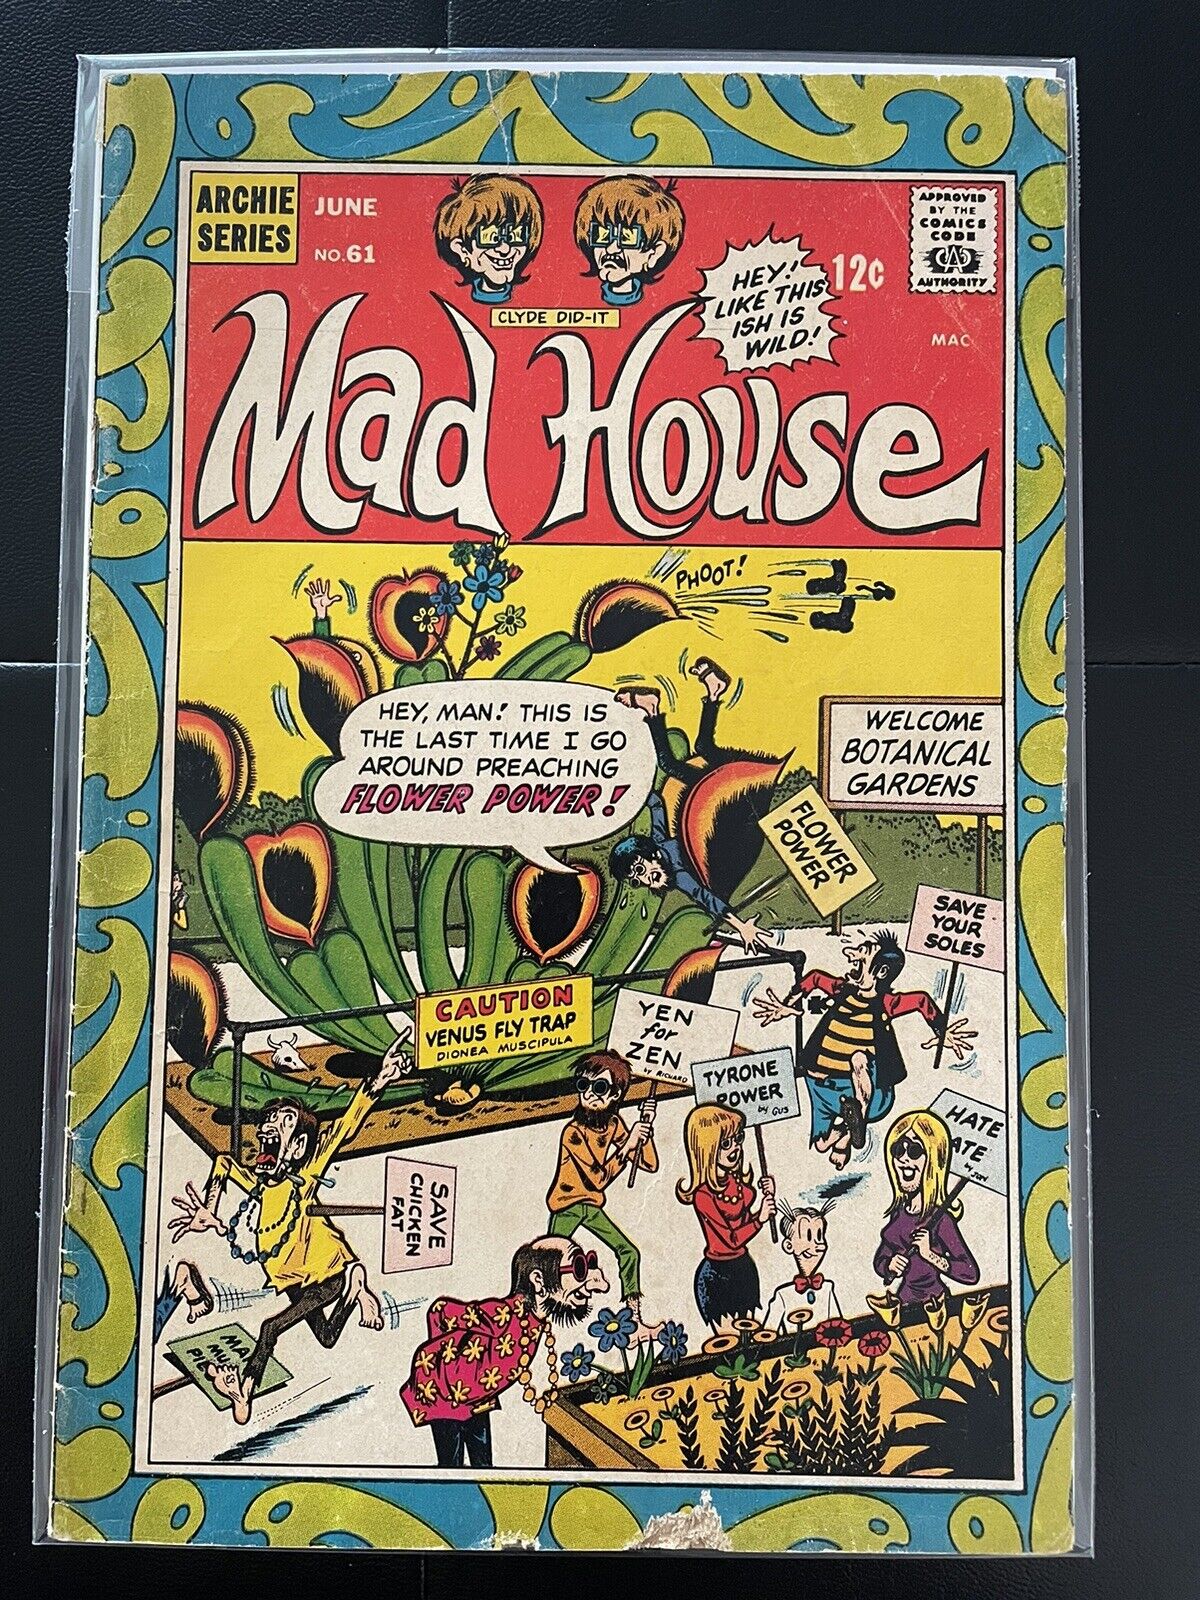 Archie\'s Madhouse #61 Archie-Front/Back Cover Issues, Pages Have Top Tears